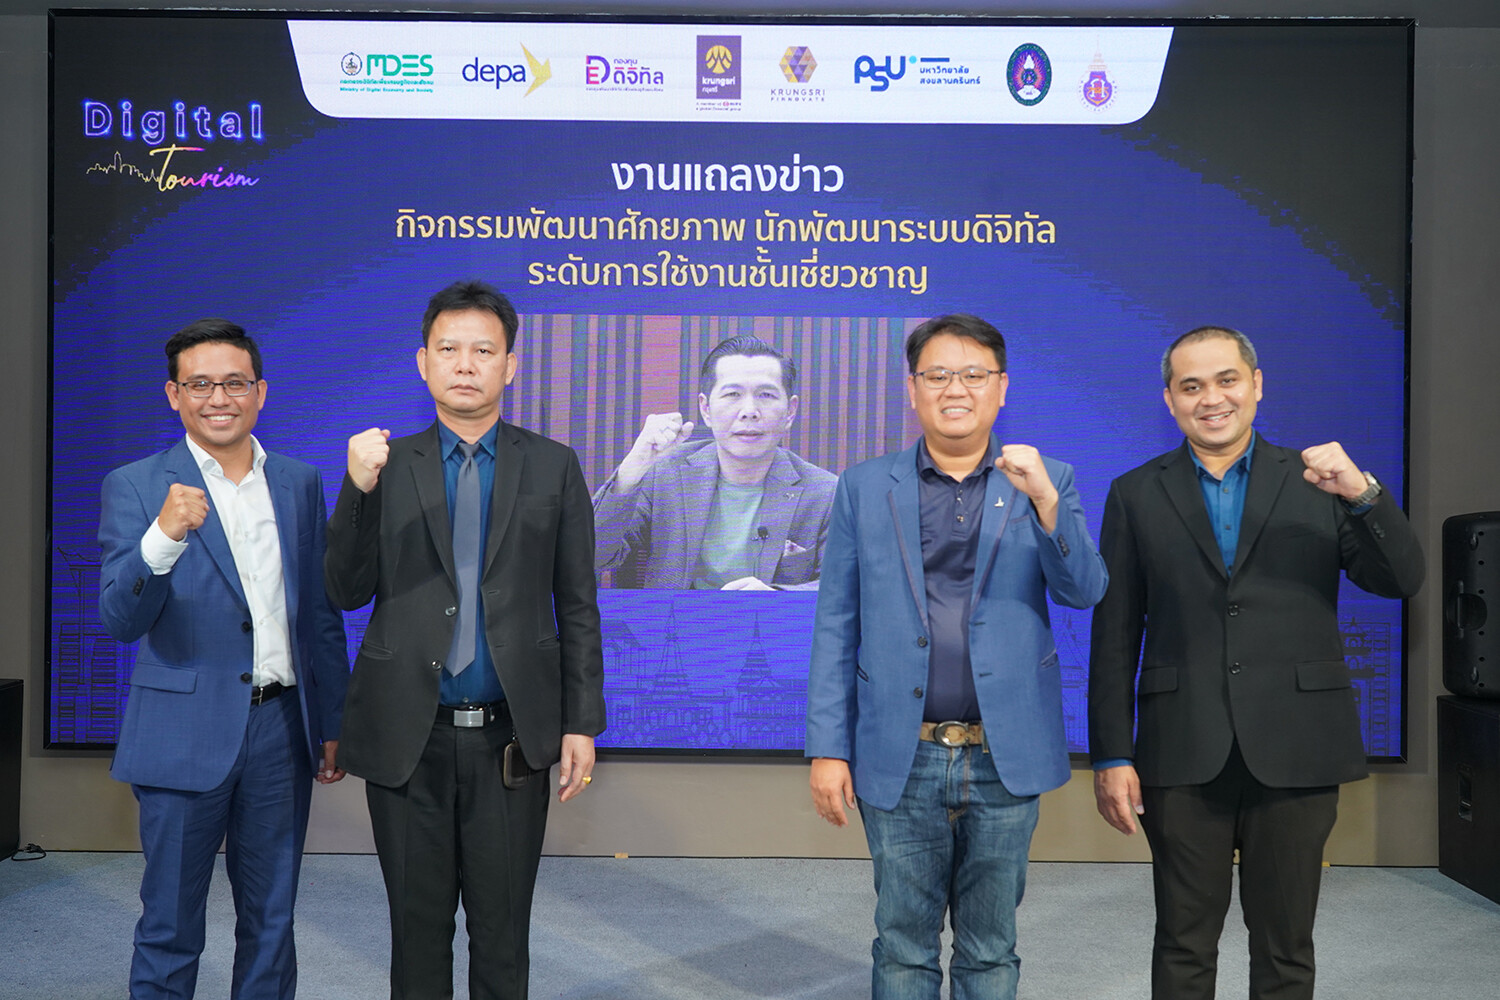 depa Joins with Partners Continue an Effort on Thai Tourism Recovery, Organizing Digital Proficiency Workshop and Short Courses for IT Developers at the Southern Roadshow